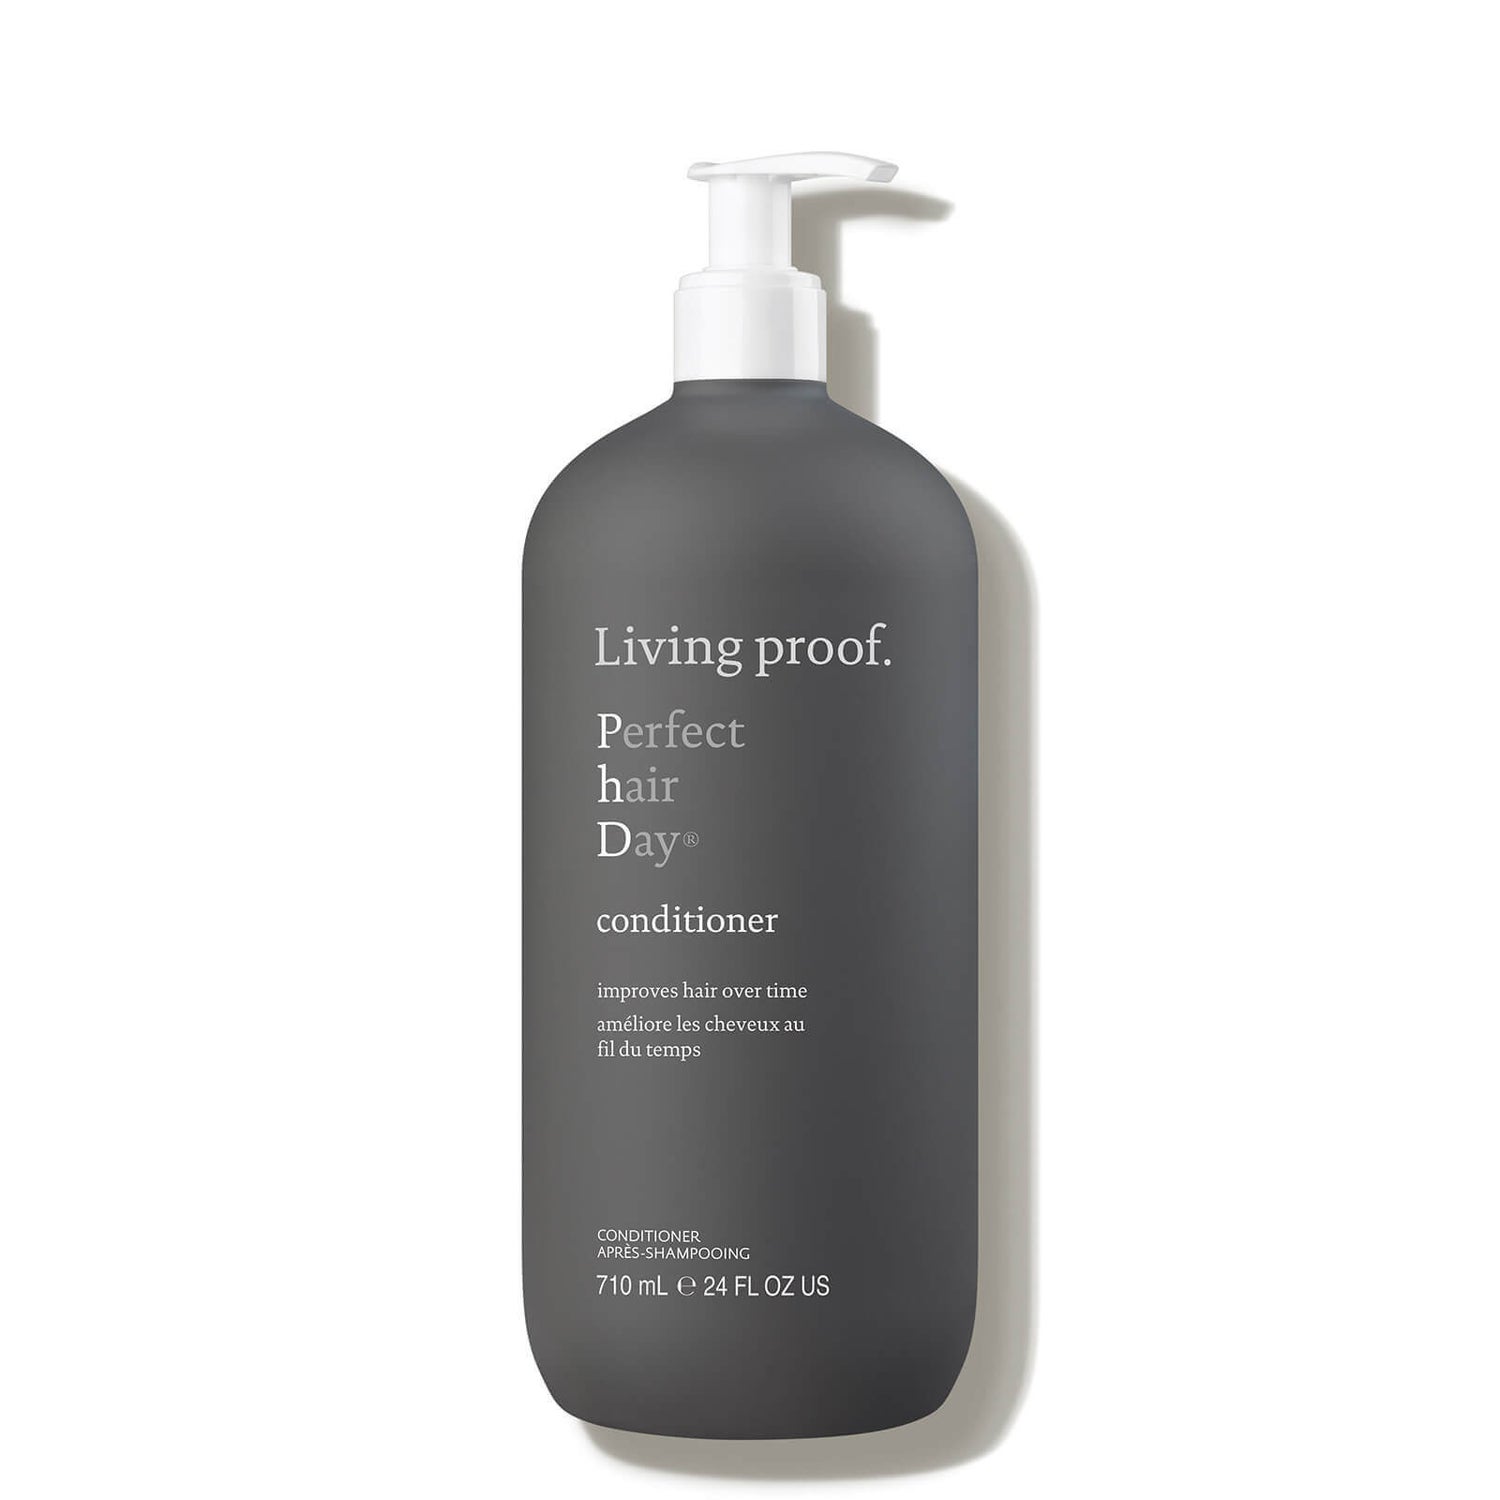 Living Proof Perfect hair Day (PhD) Conditioner (24 fl. oz.)